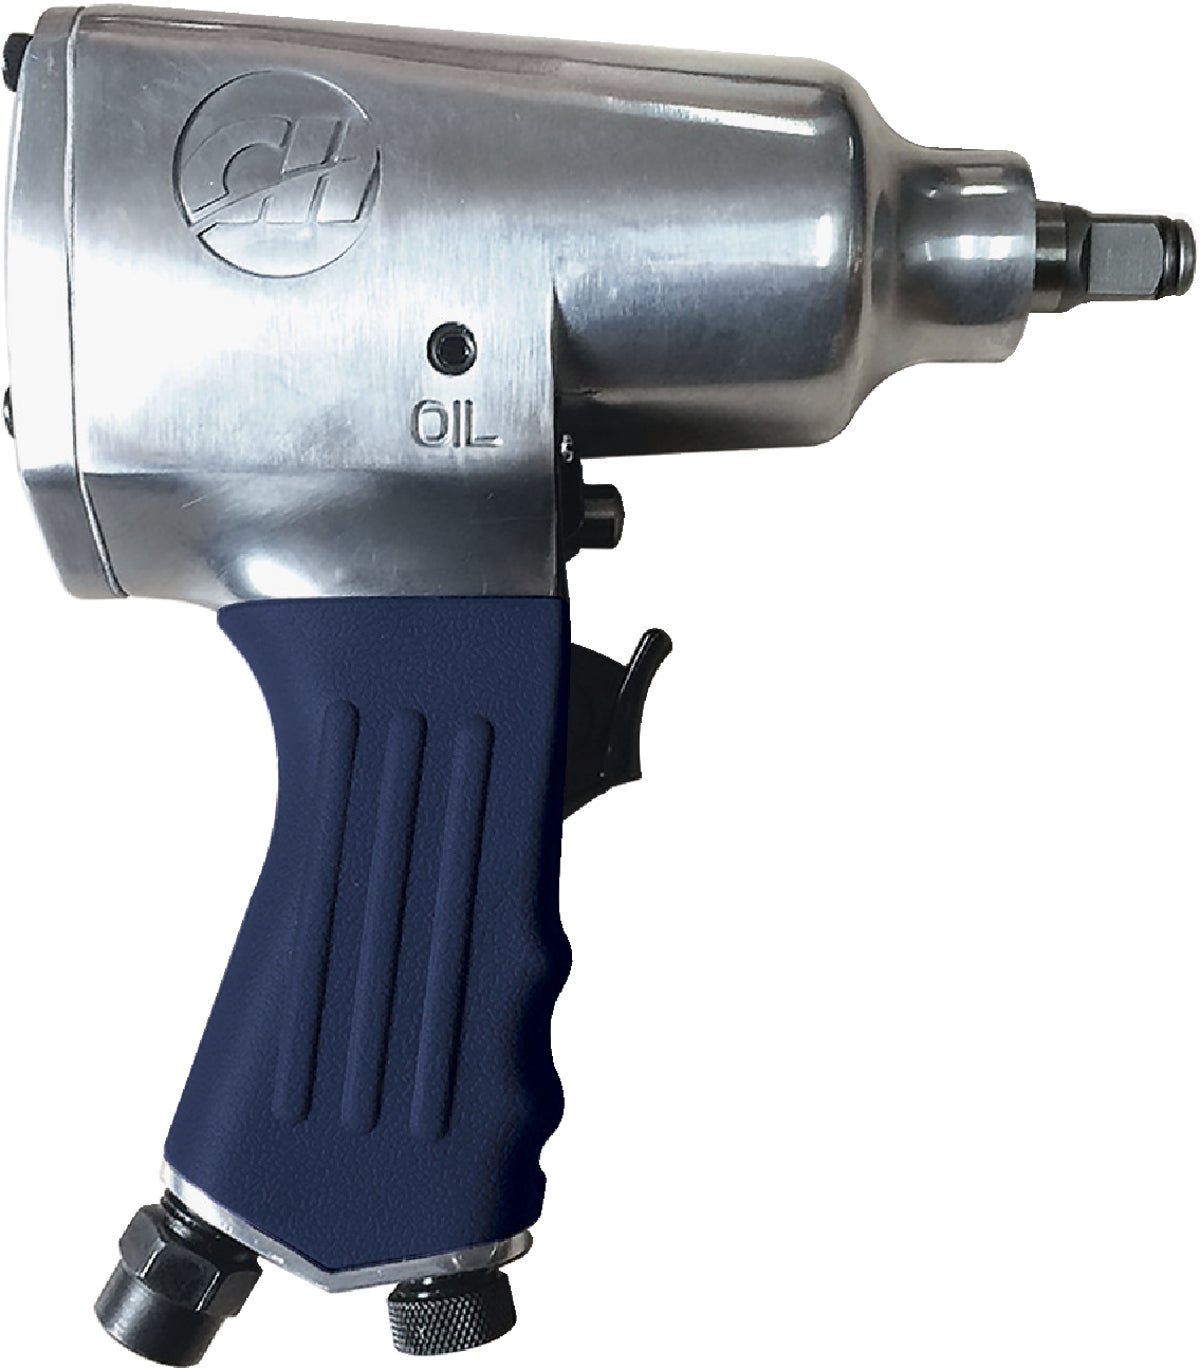 Campbell Hausfeld TL1017 3/8-Inch Butterfly Impact Wrench 